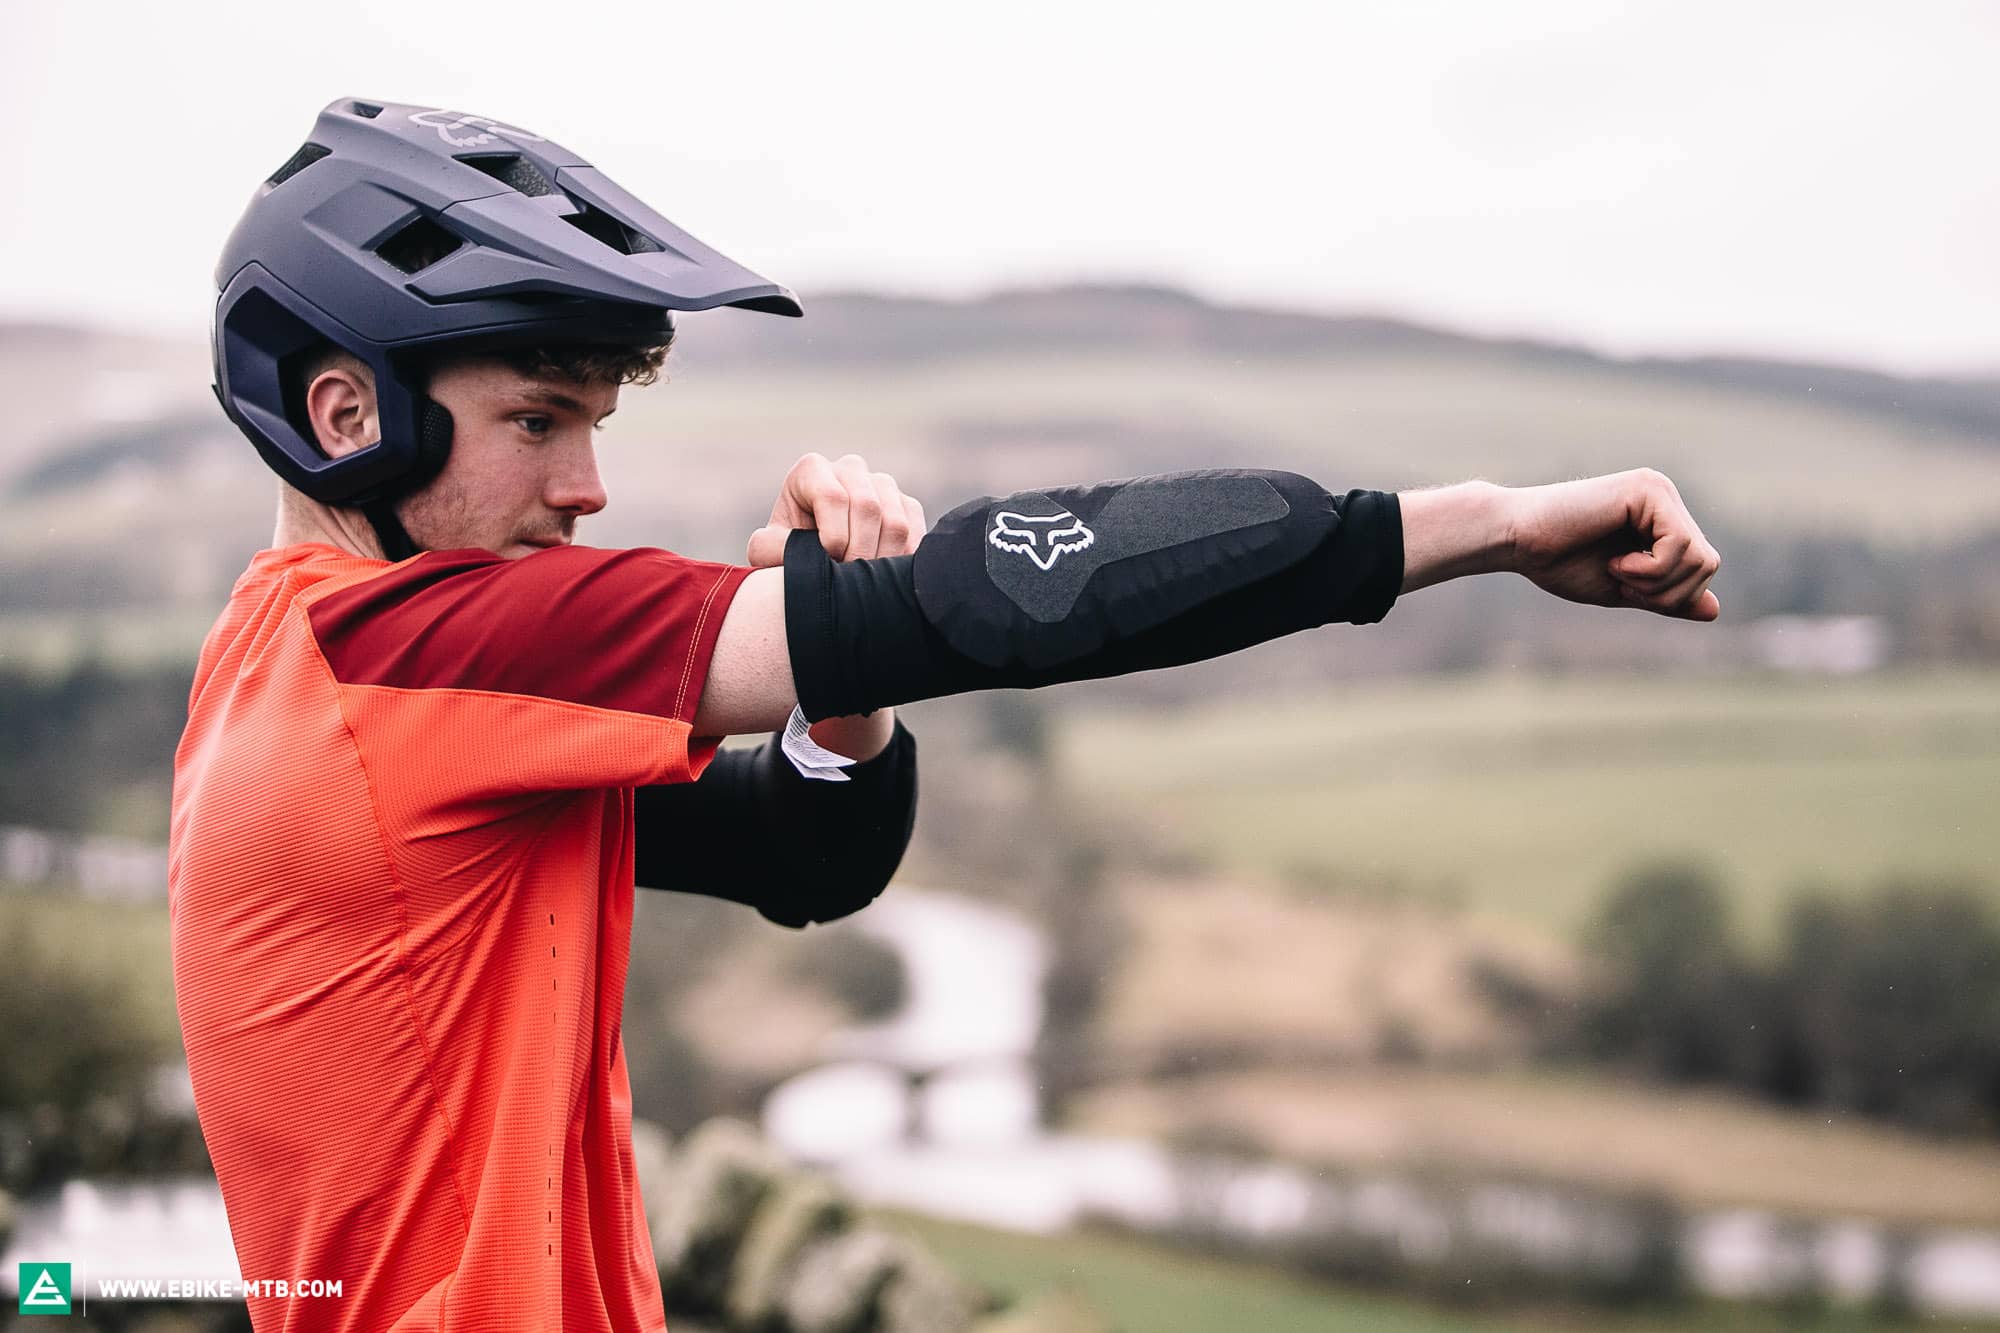 The eMTB protection guide – How much protection should I wear whilst riding my eMTB?